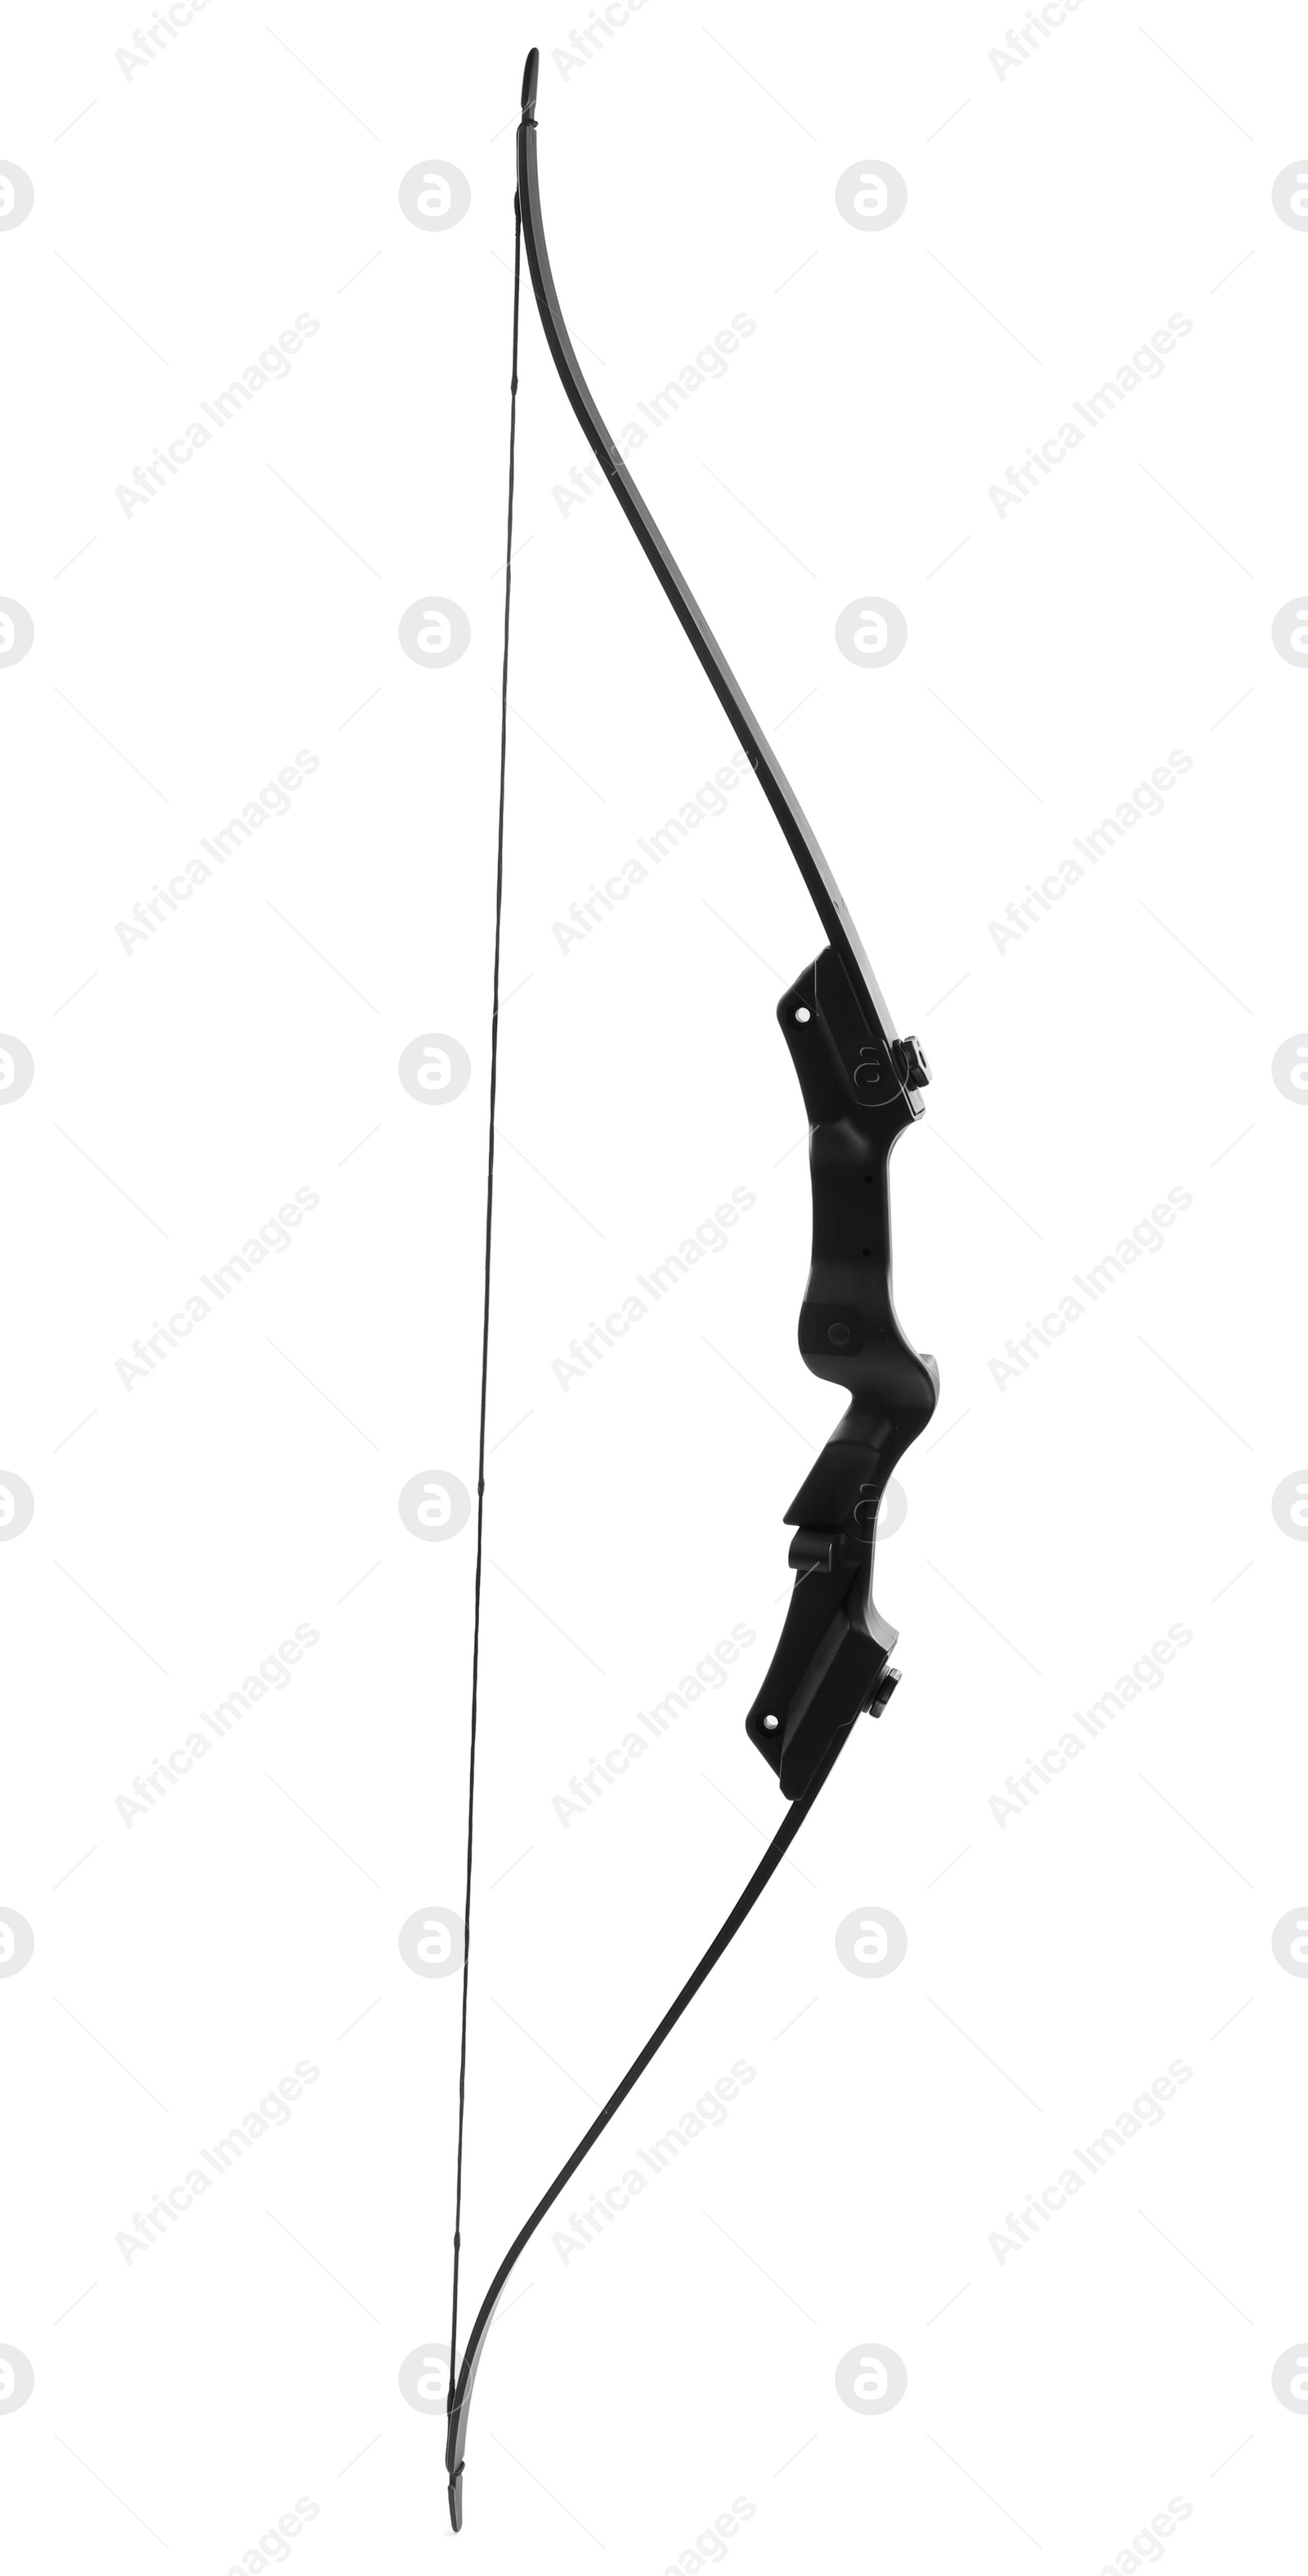 Photo of Black bow on white background. Archery sports equipment